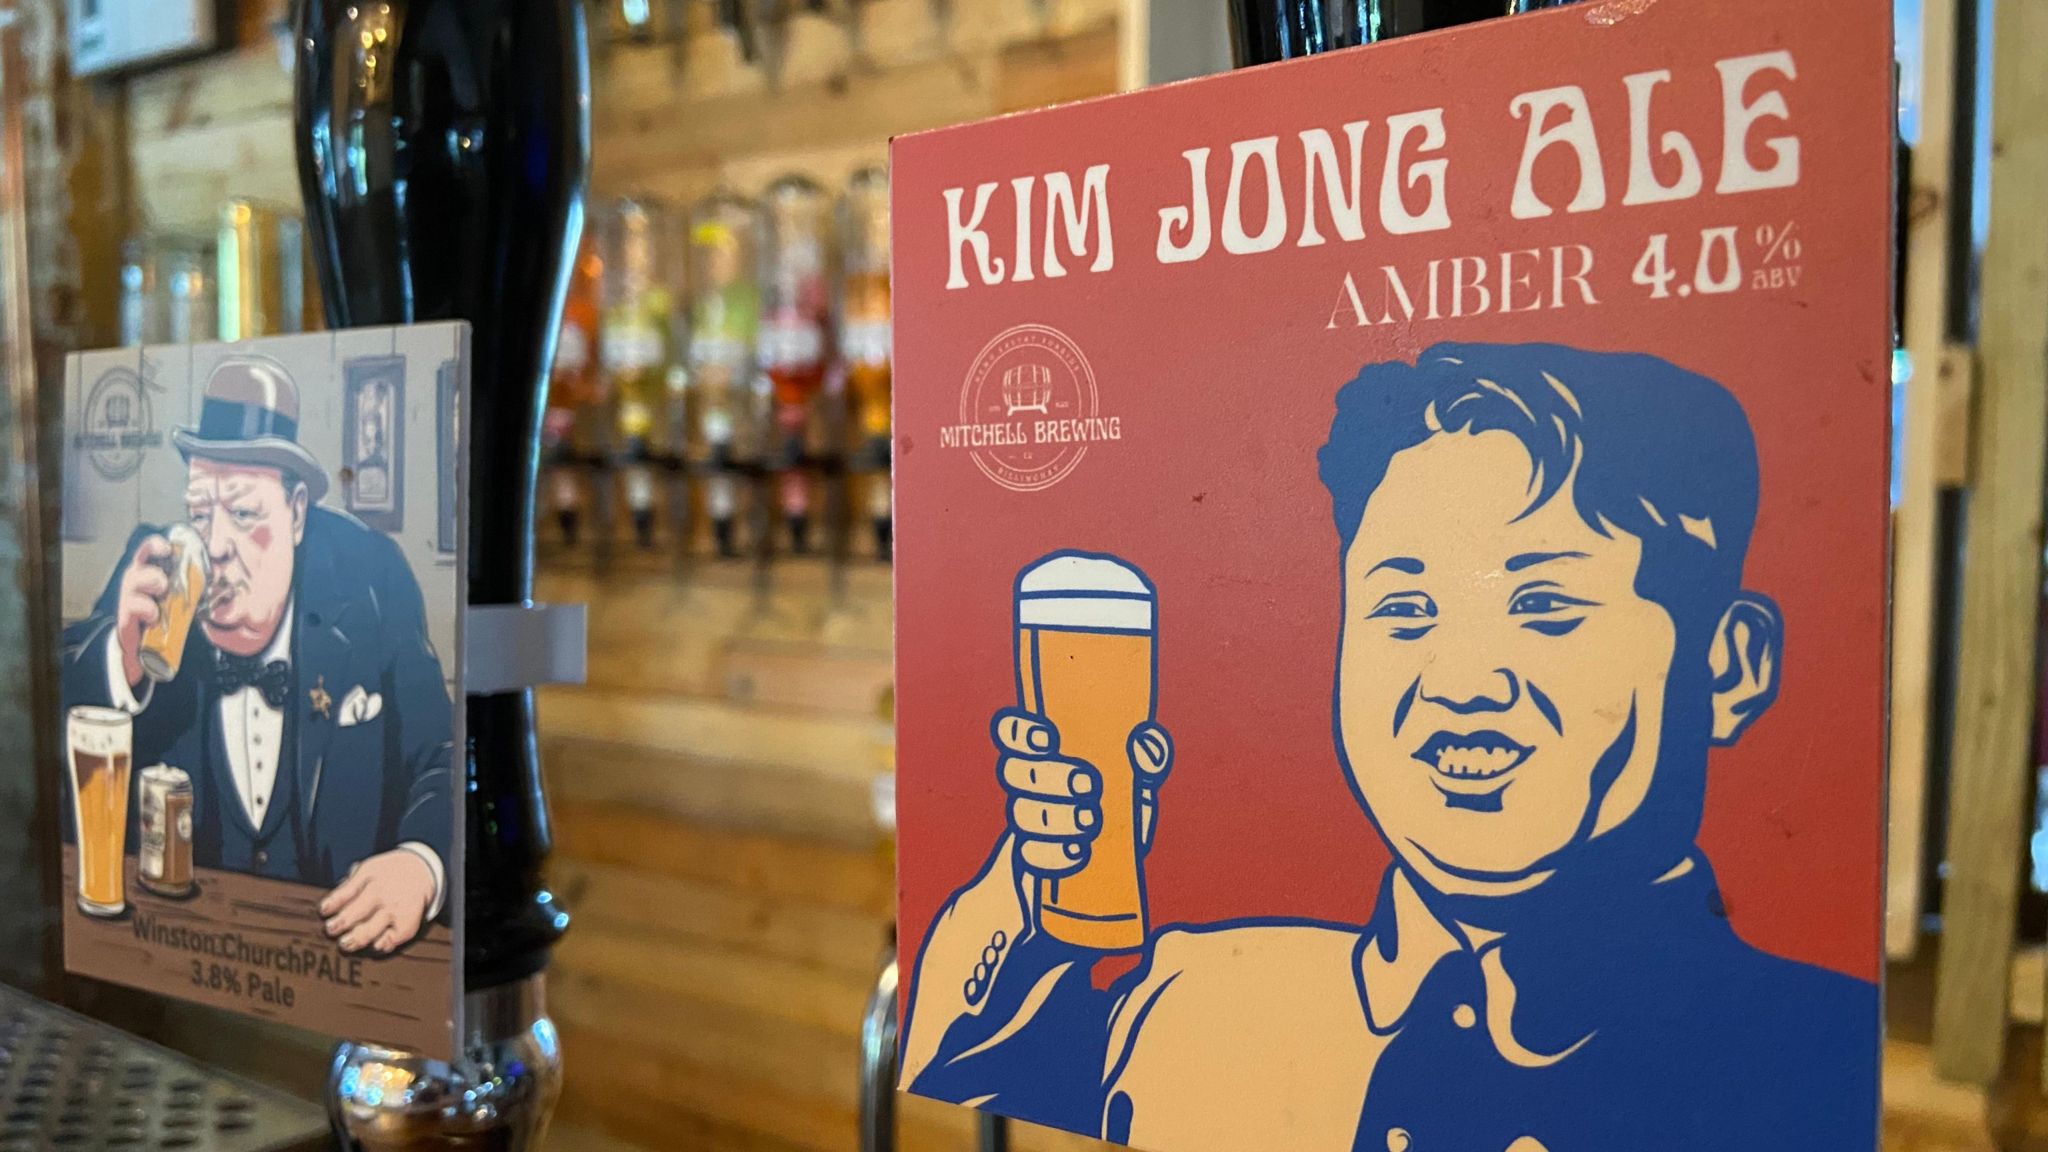 Labels for Kim Jong Ale and Winston Churchpale beers